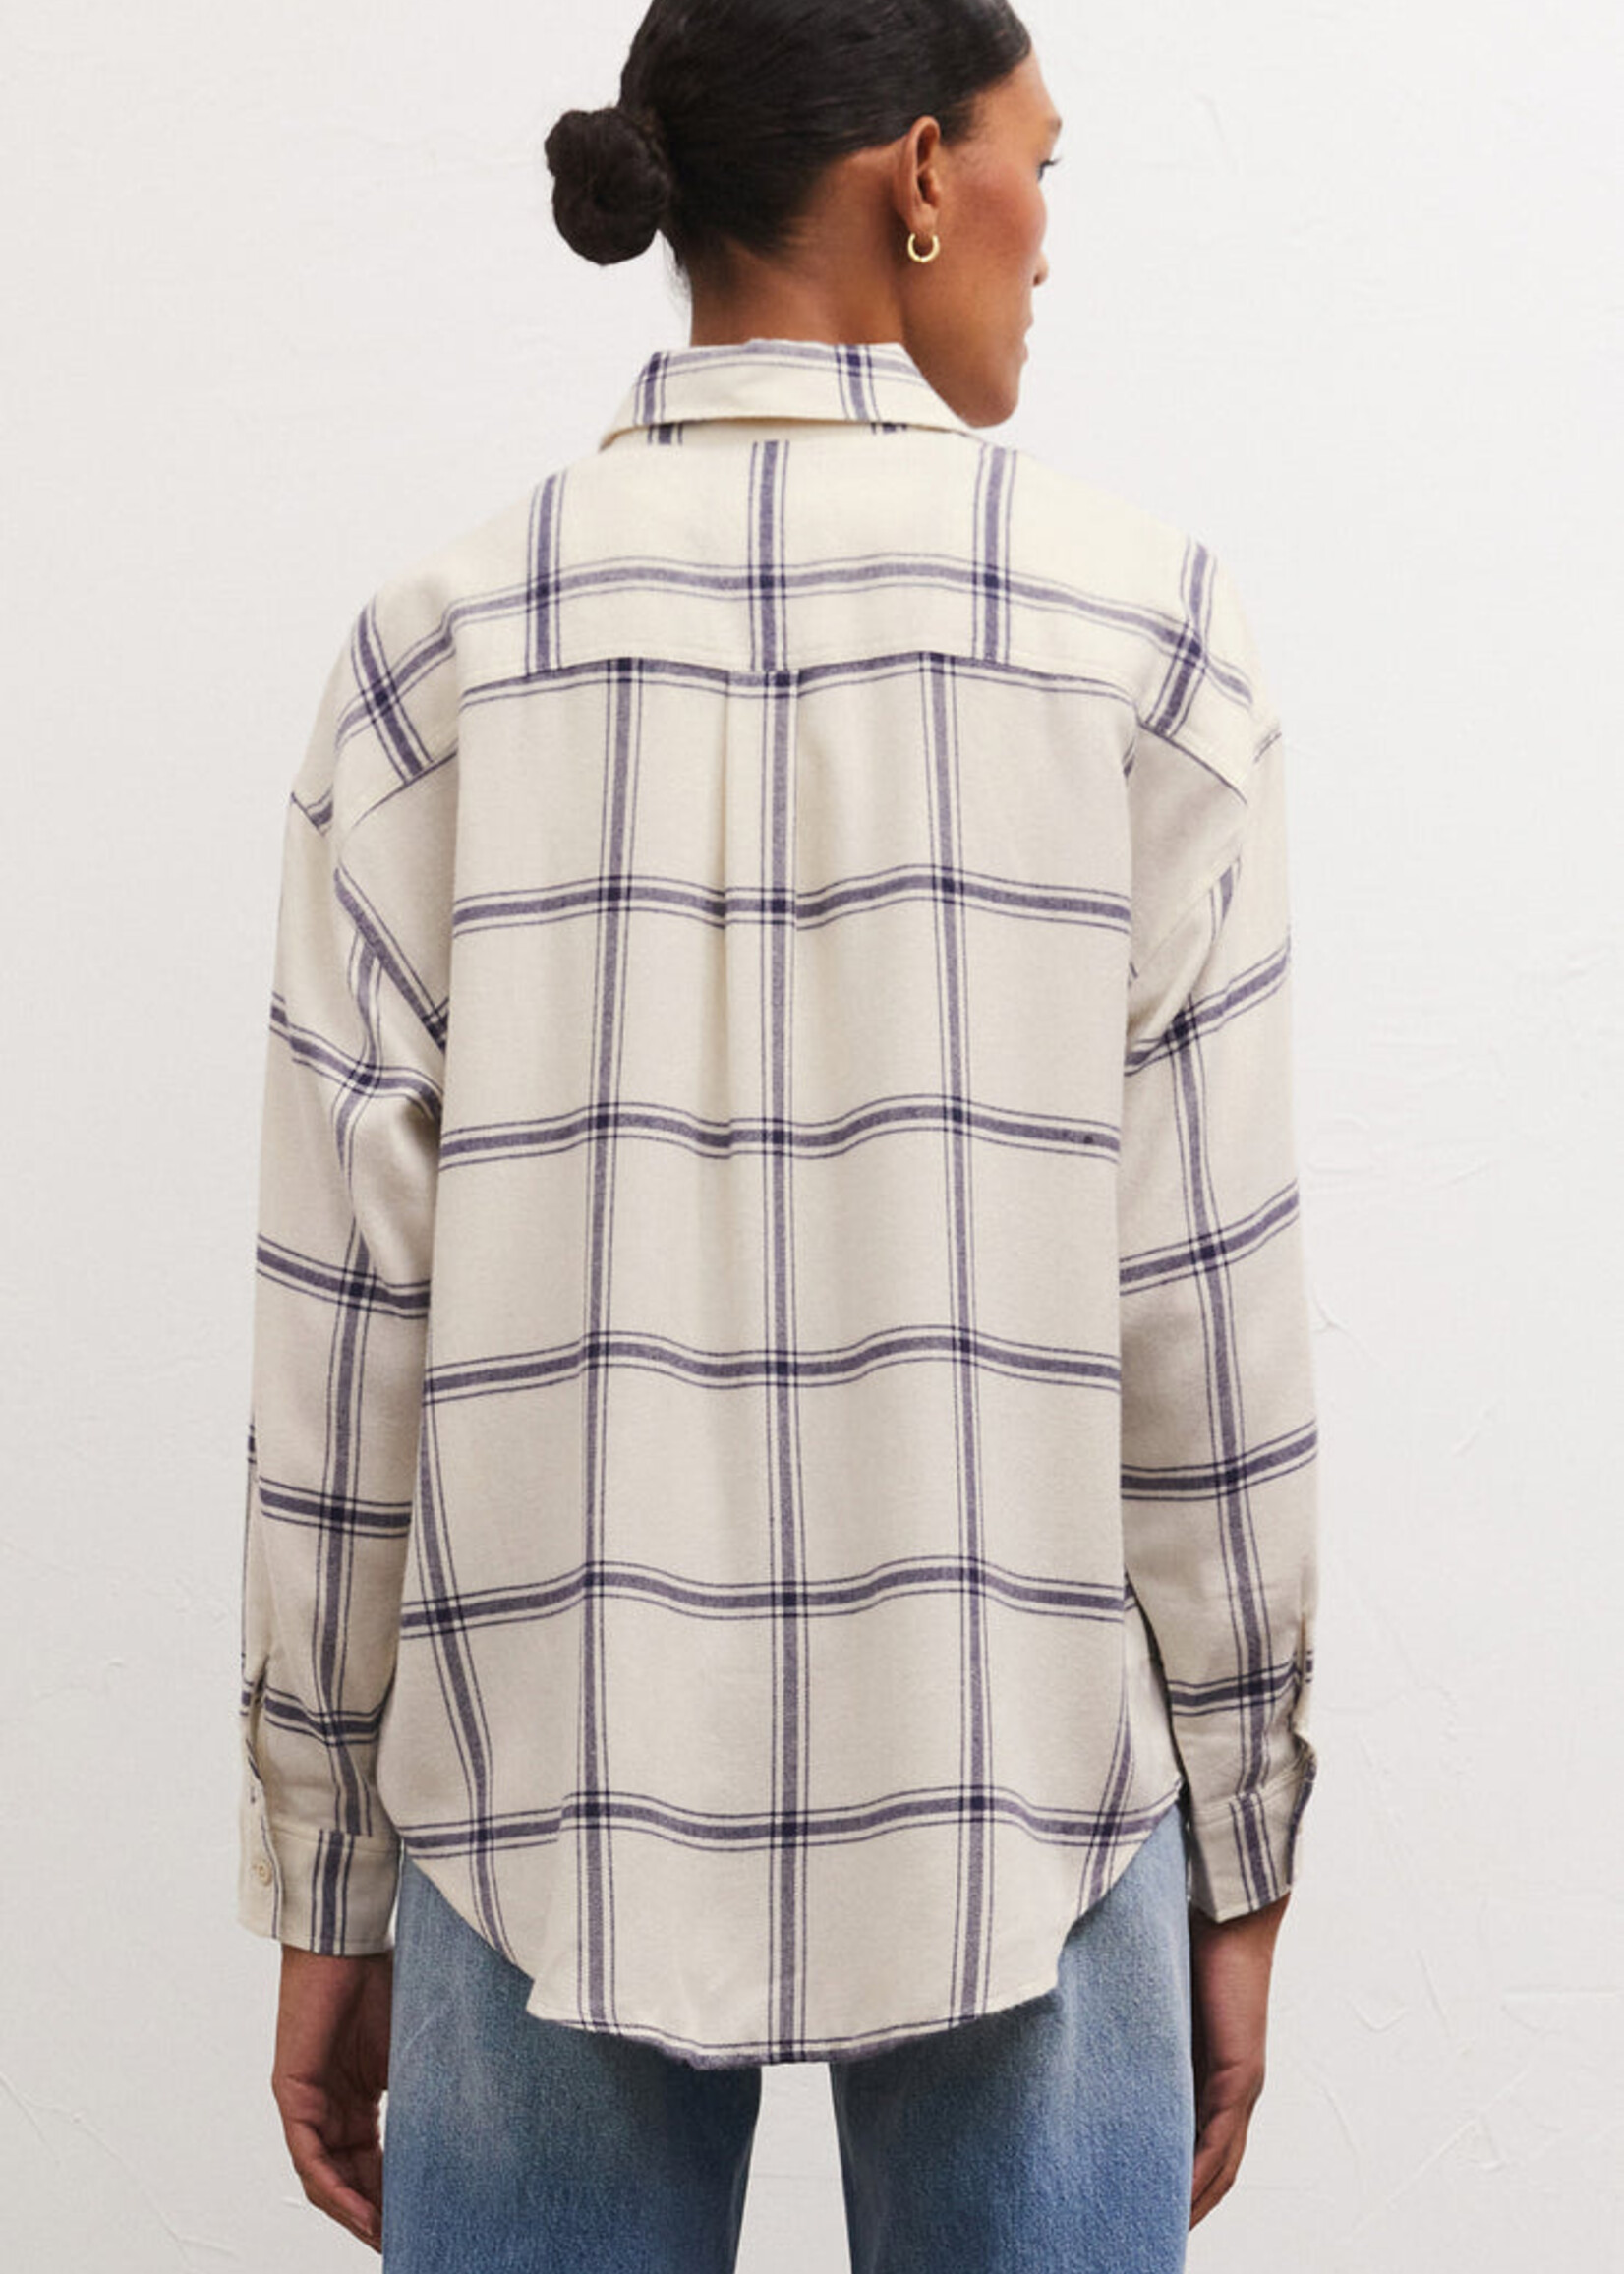 Z Supply River Plaid Button Up